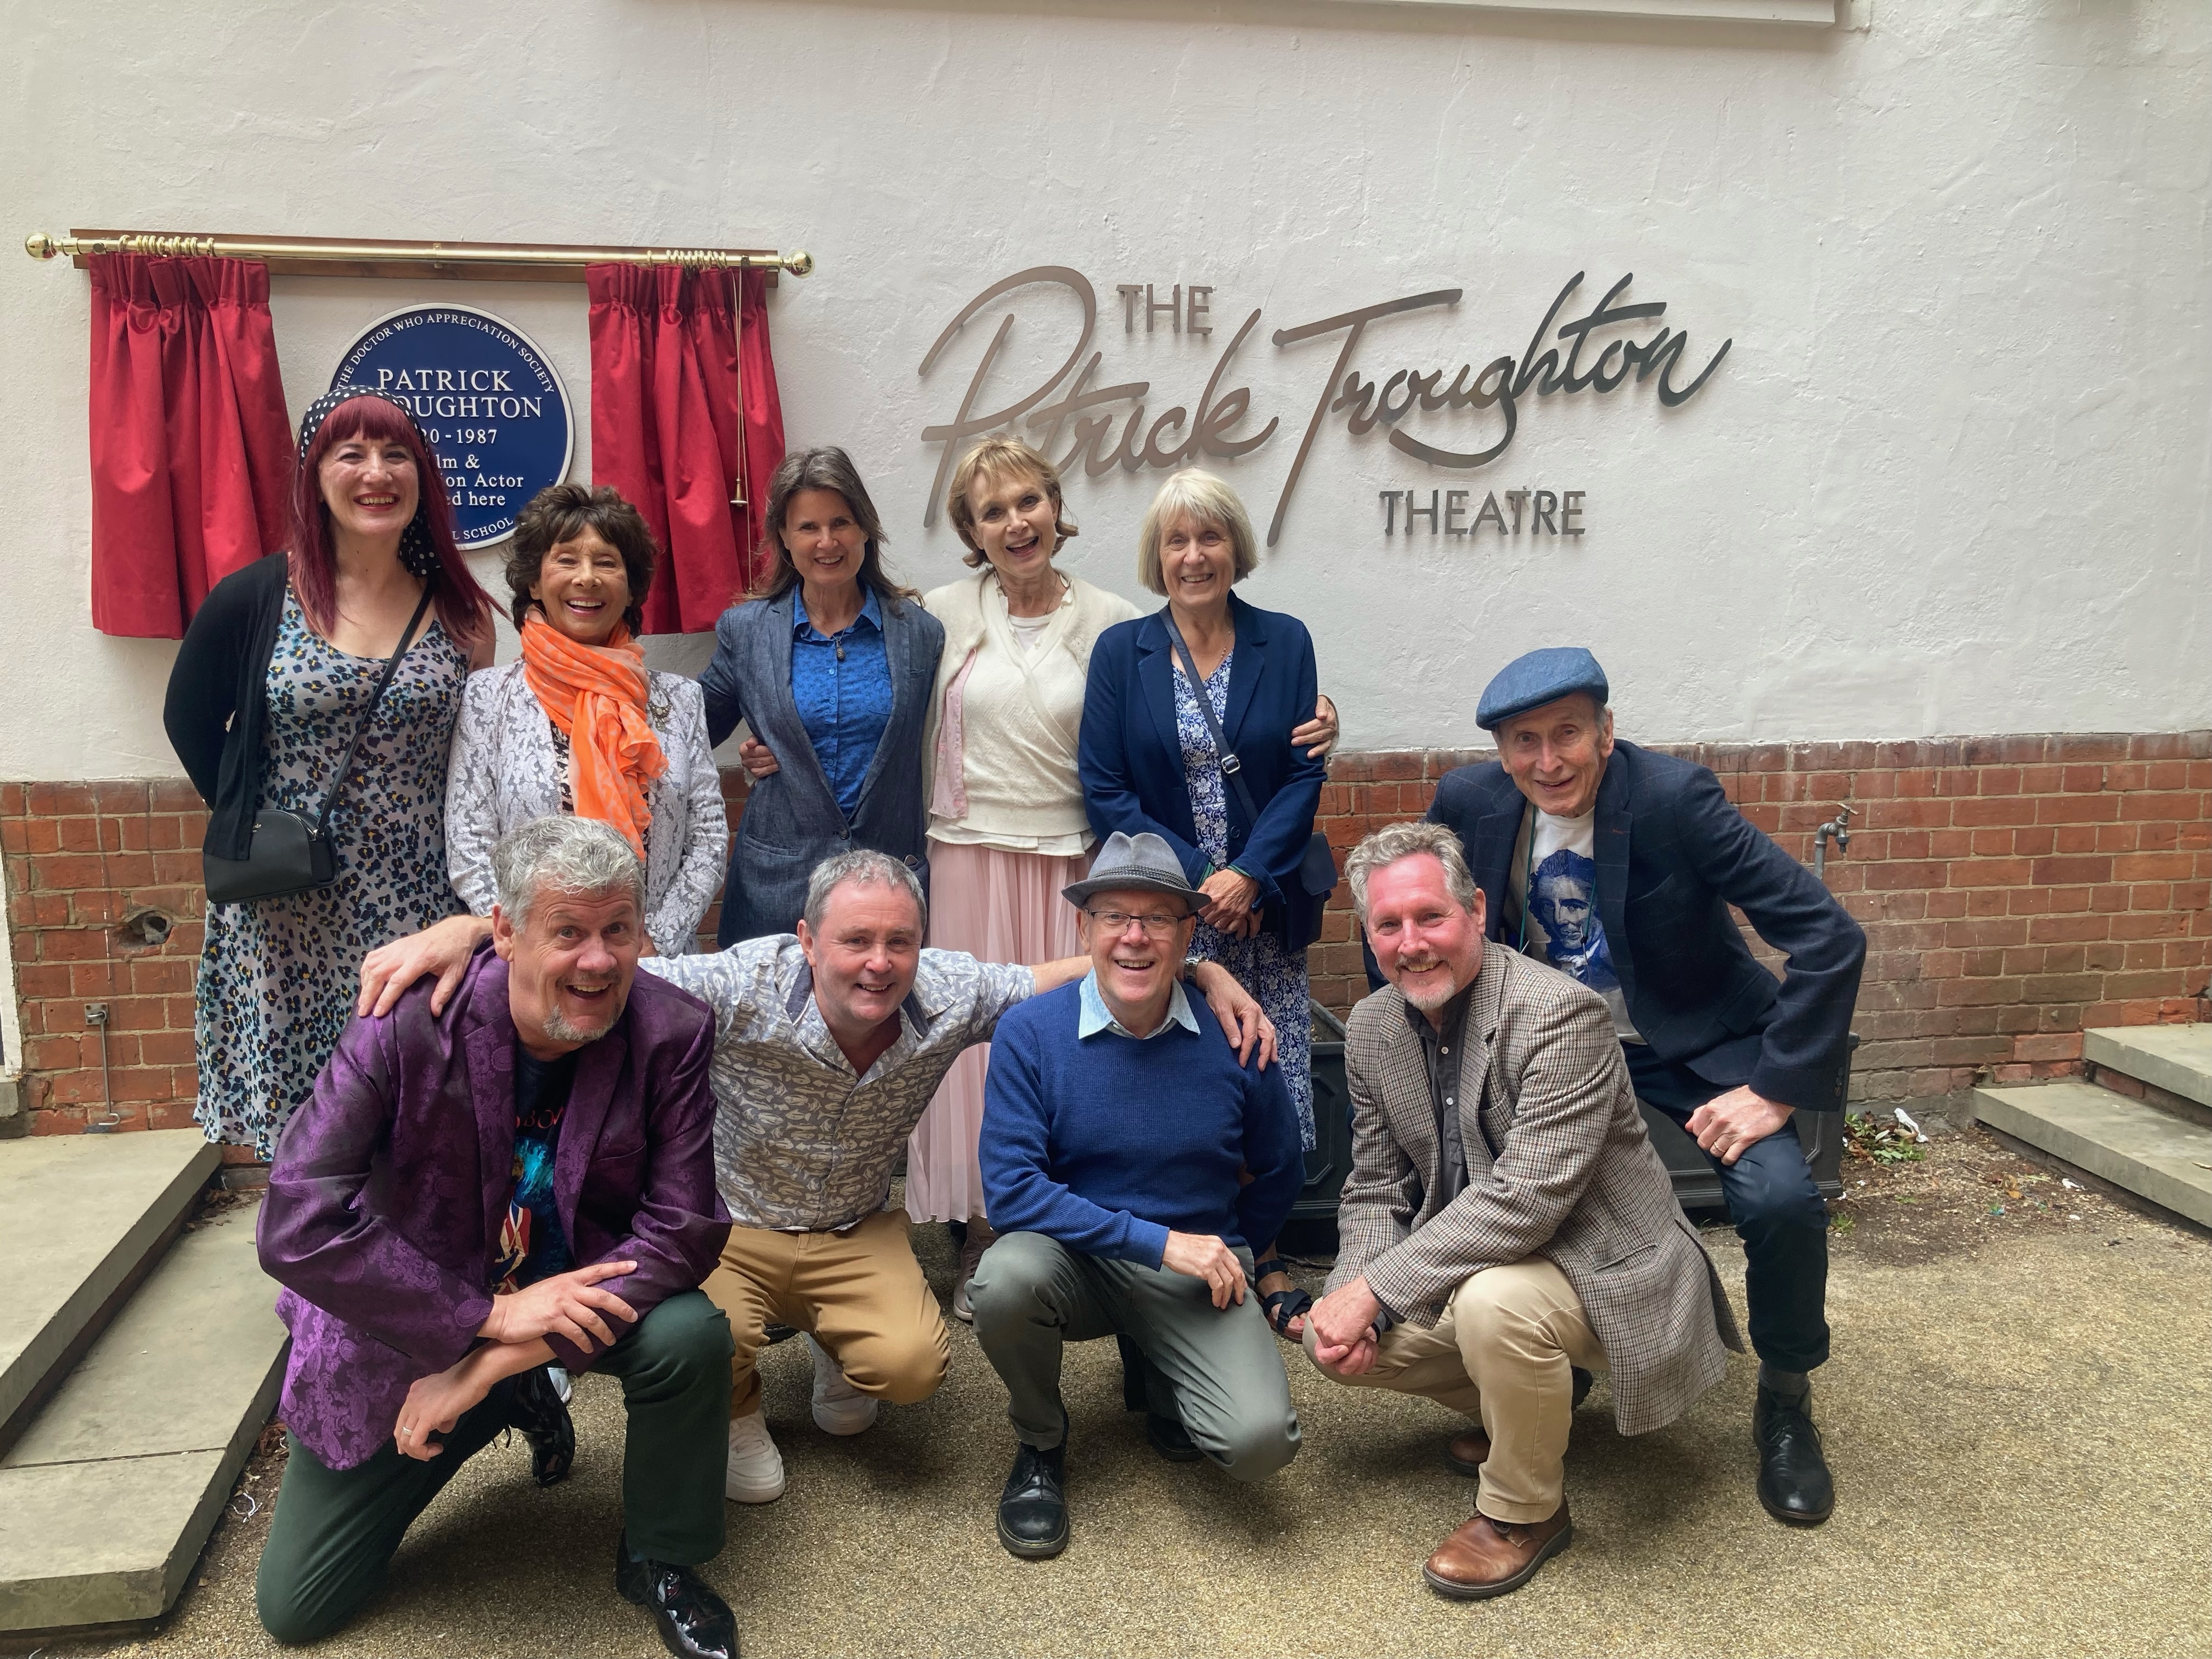 With Roxanne Troughton, Carole Ann Ford, Sophie Aldred, Jo Troughton, Chris Tranchell, Martin Spellacey, Dave Greenham, Peter Fuller and Gary Hopkins.